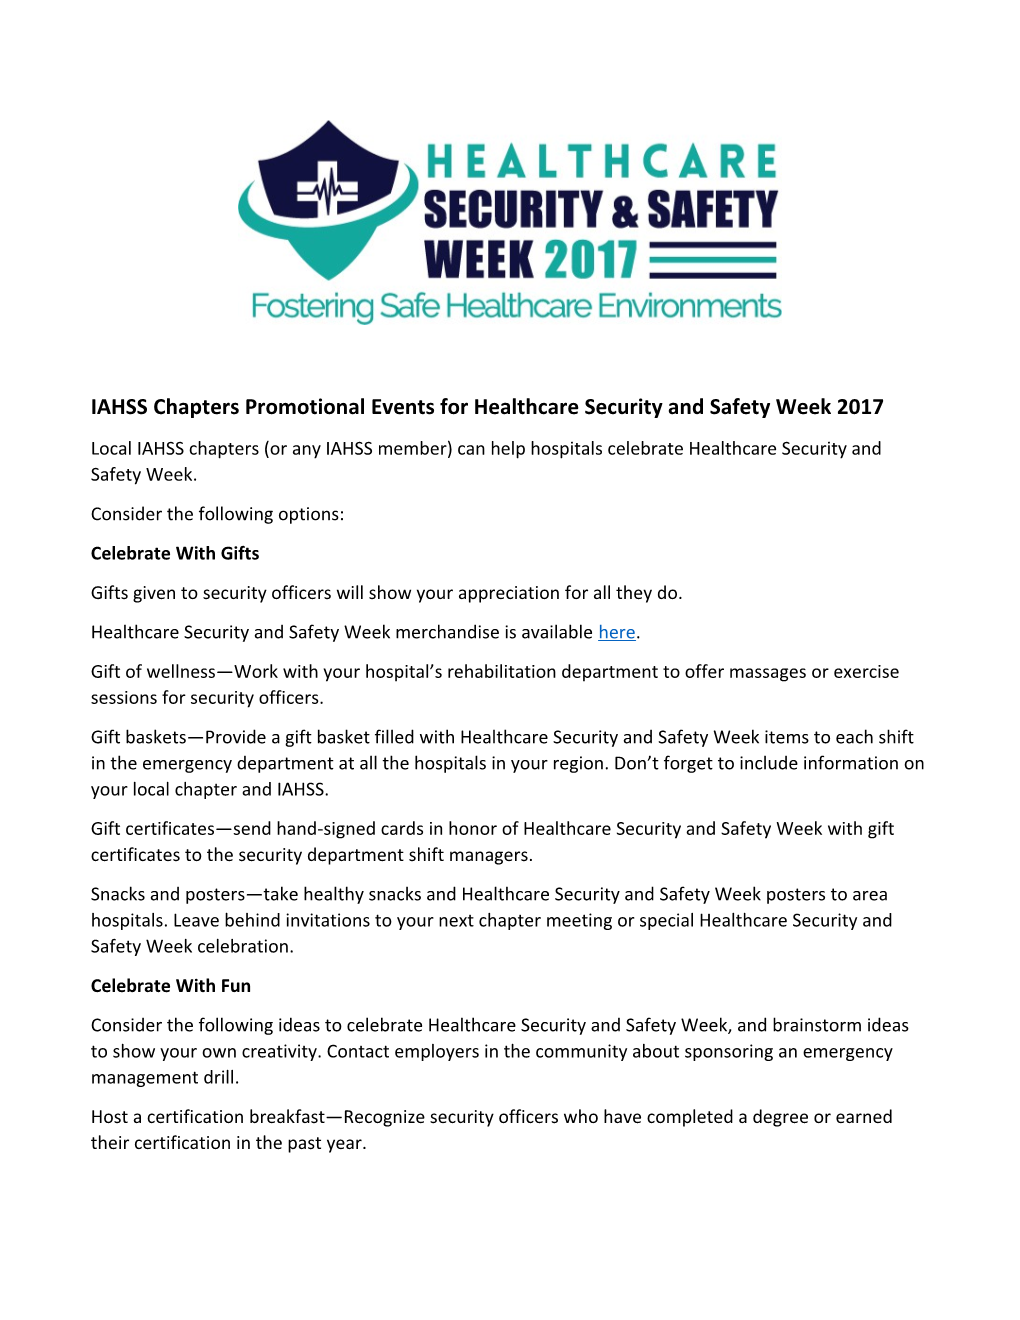 IAHSS Chapters Promotional Eventsfor Healthcare Security and Safety Week 2017